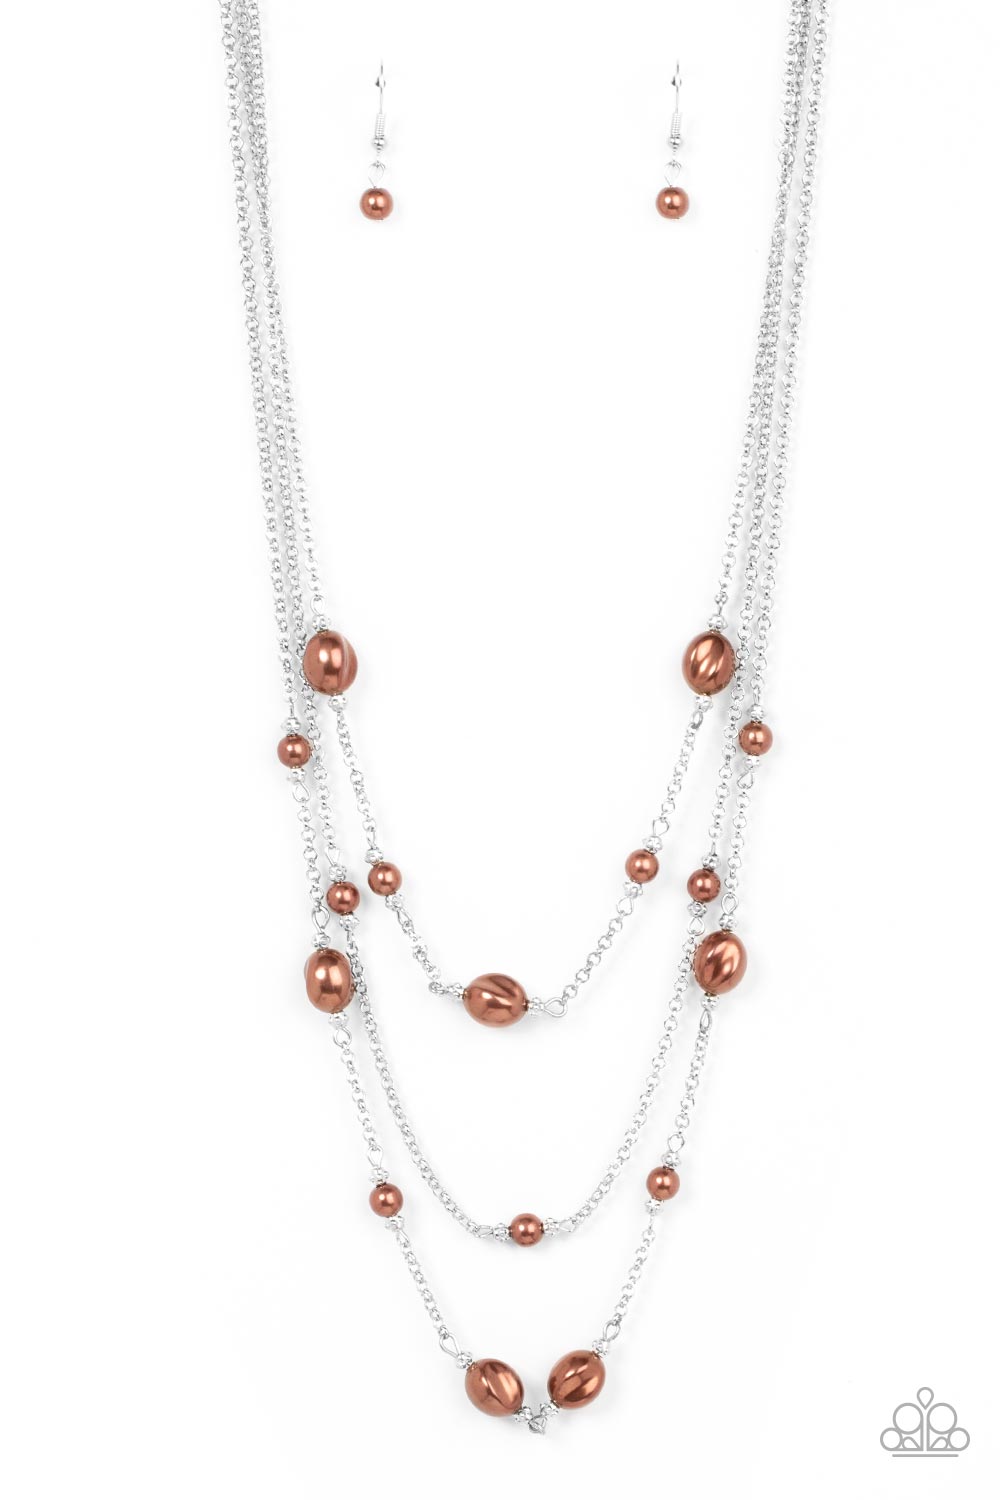 Pearlicious Pop - Brown Pearl Silver Layered Medium Length Necklace